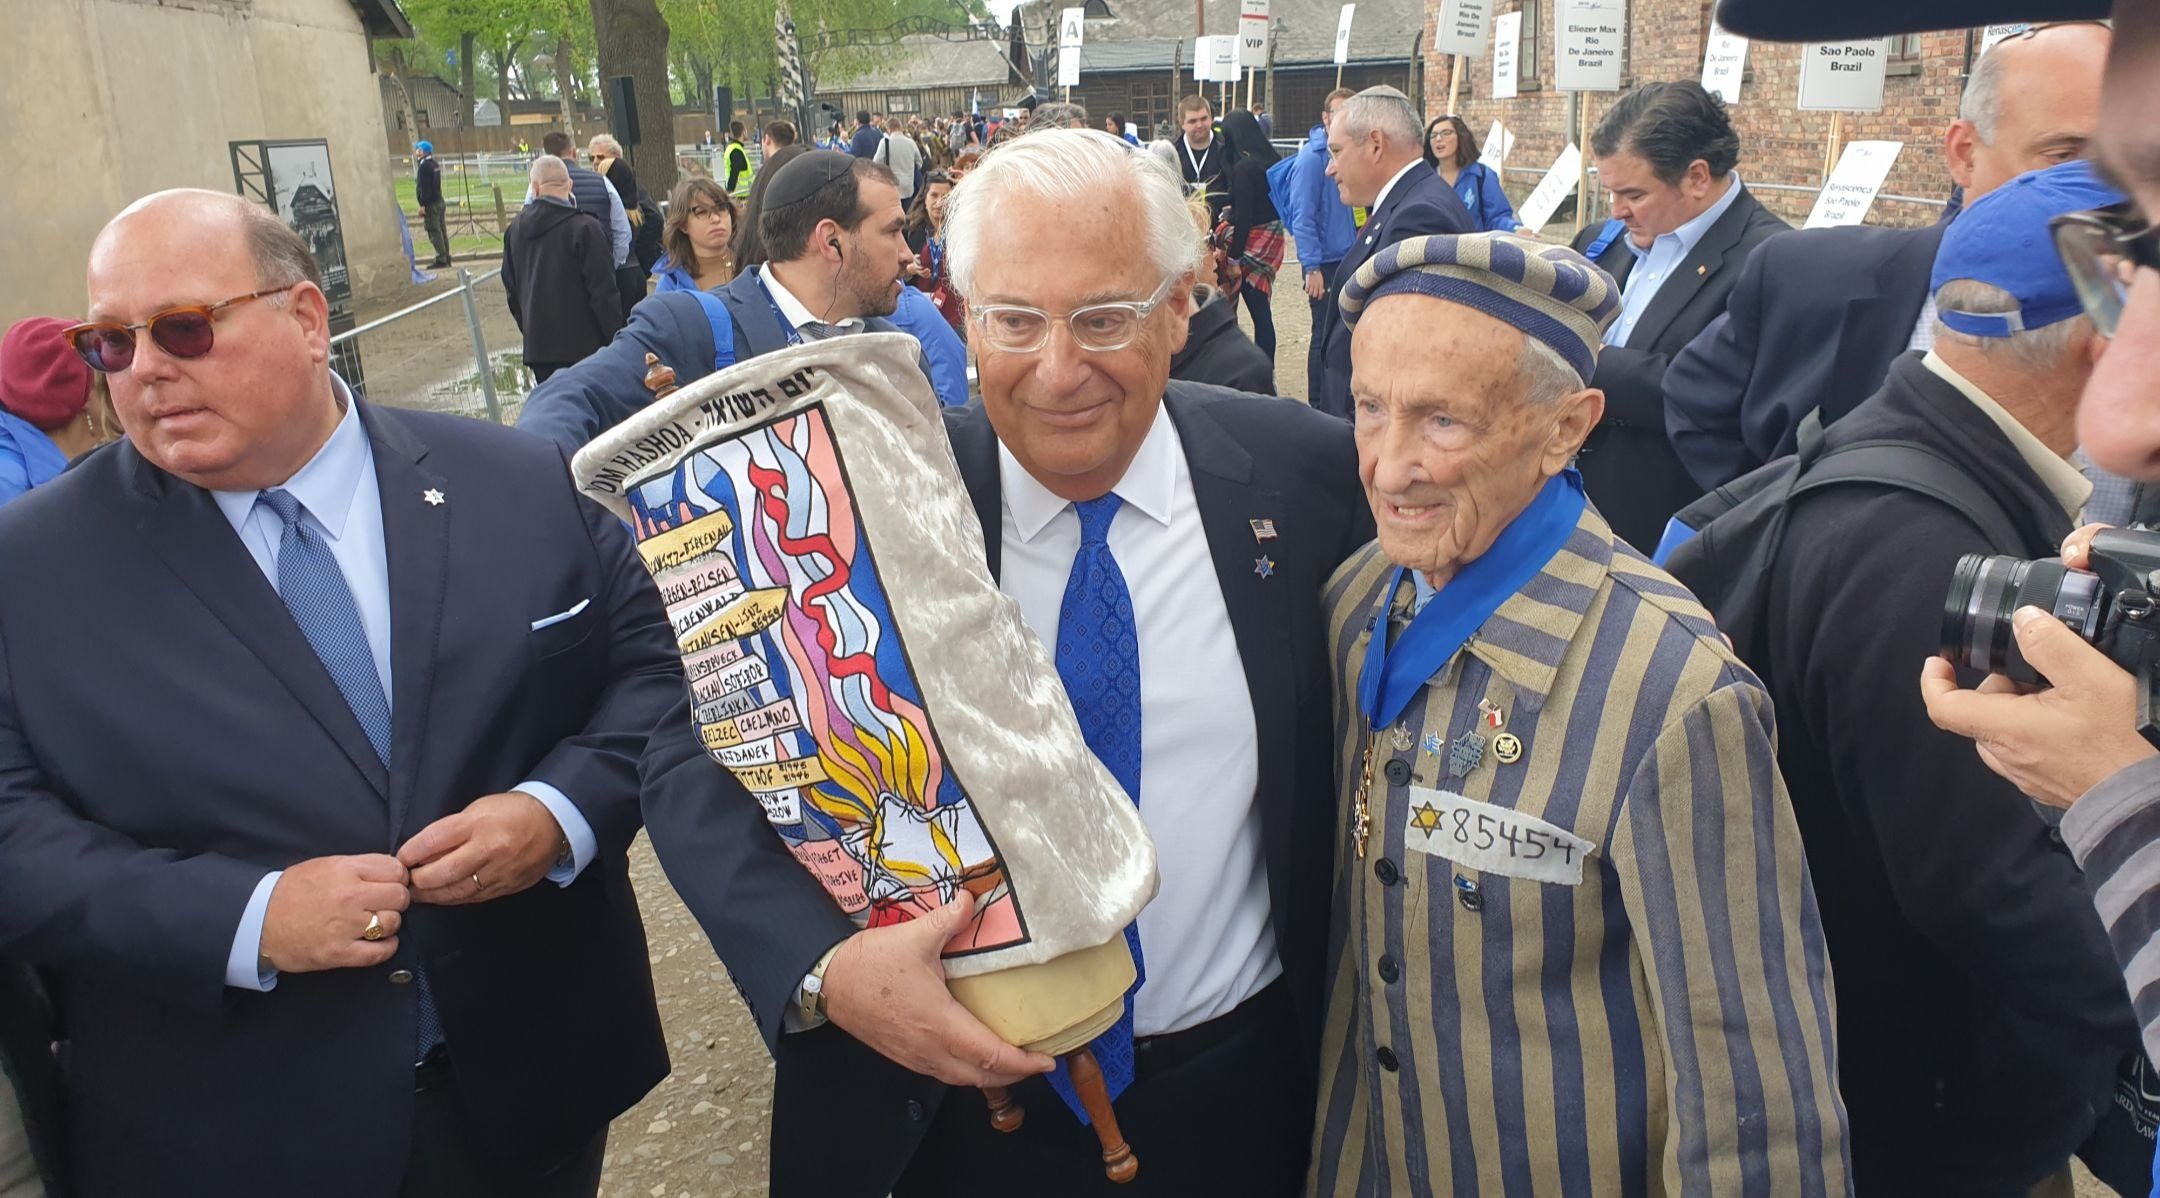 U.S. Ambassador to Israel David Friedman with prominent New Jersey Holocaust survivor Ed Mosberg at the March of the Living at Auschwitz-Birkenau on May 2, 2019. (Cnaan Liphshiz)